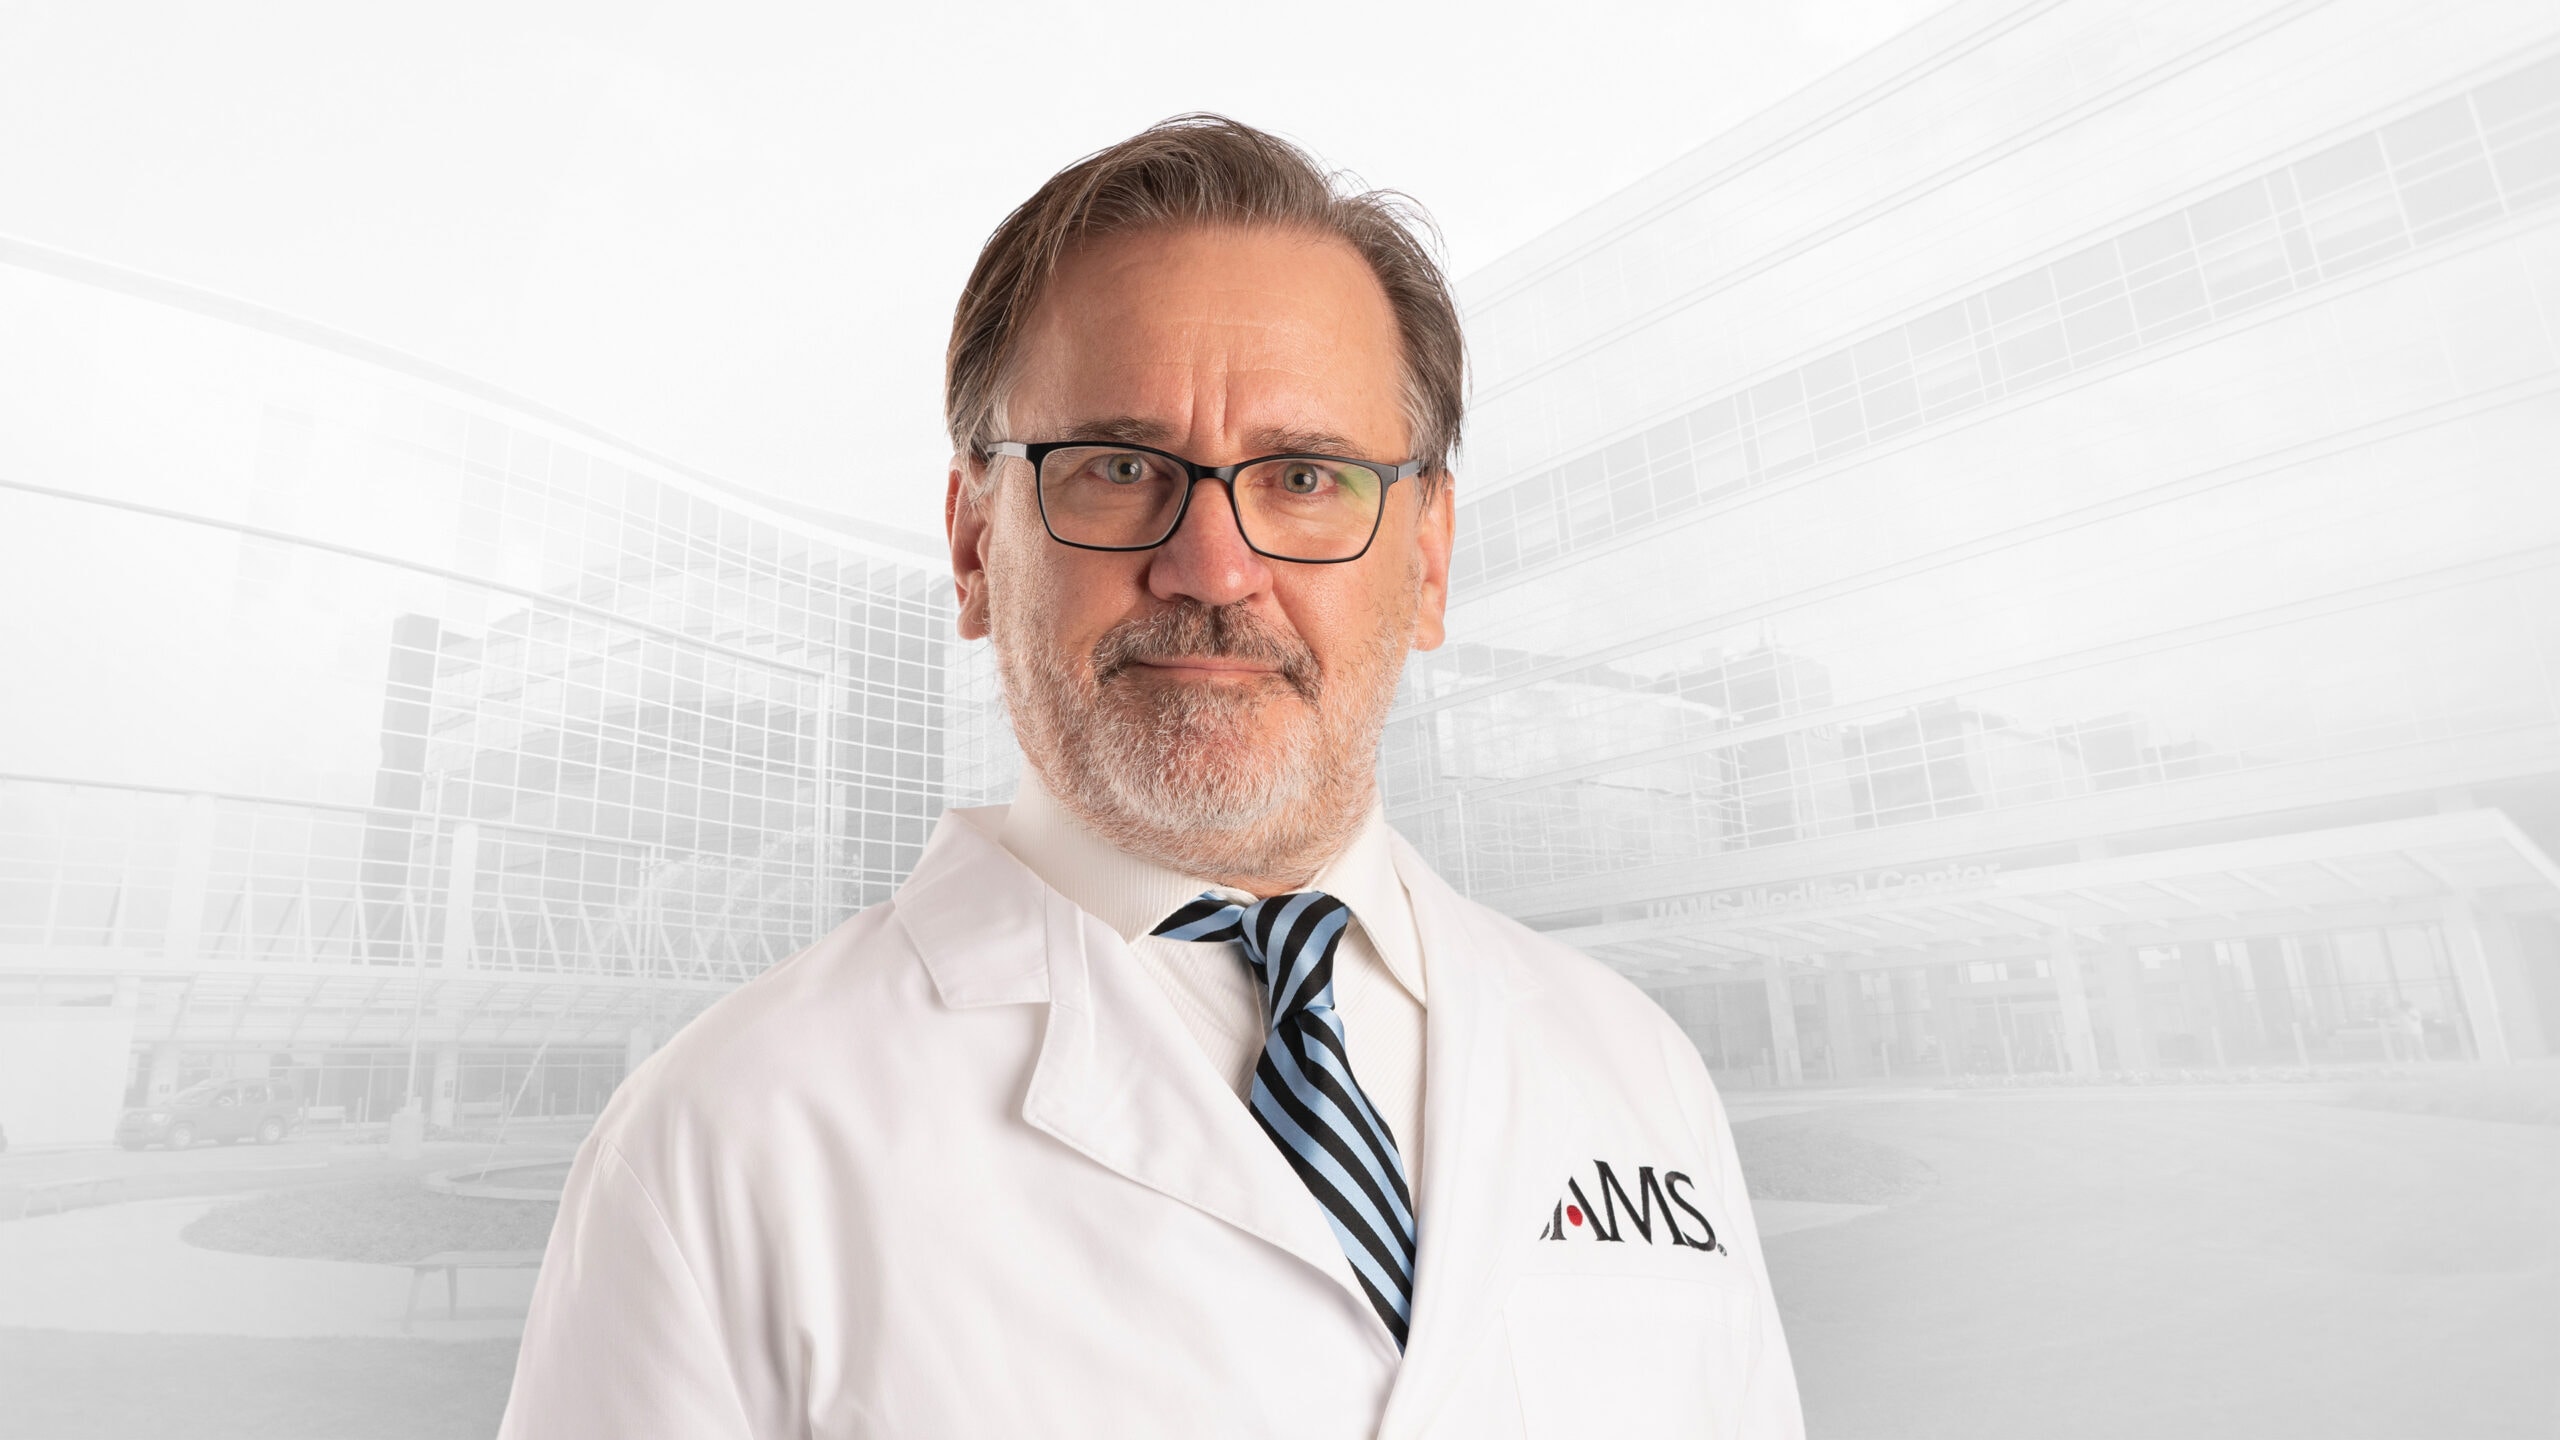 “Dr. Shaughnessy’s return to UAMS expands and strengthens our research and subsequent treatment here at the Myeloma Center,” said Fenghuang “Frank” Zhan, director of research at the Myeloma Center.